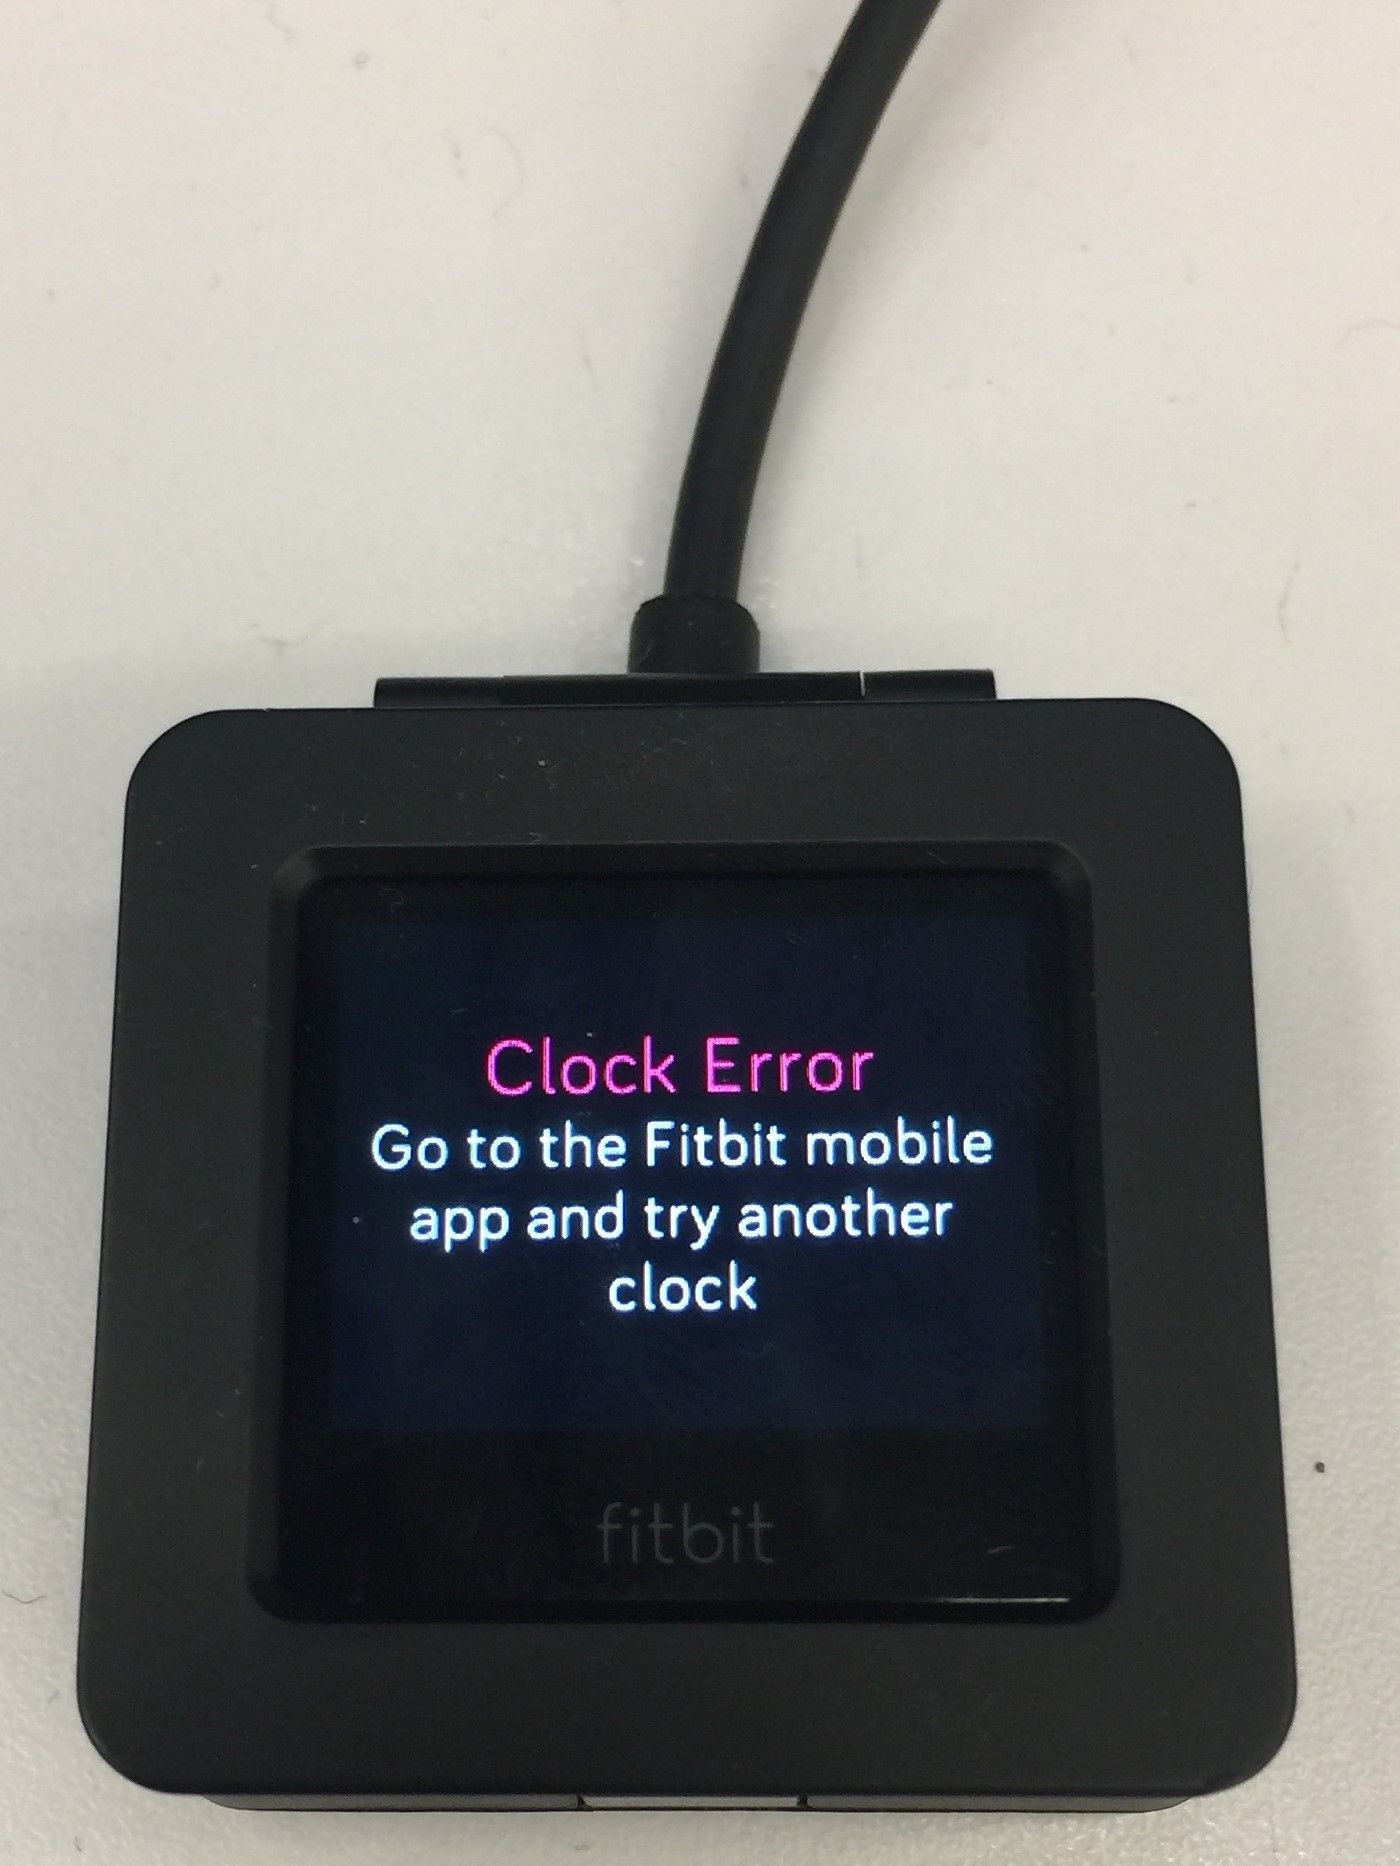 how to reset fitbit clock